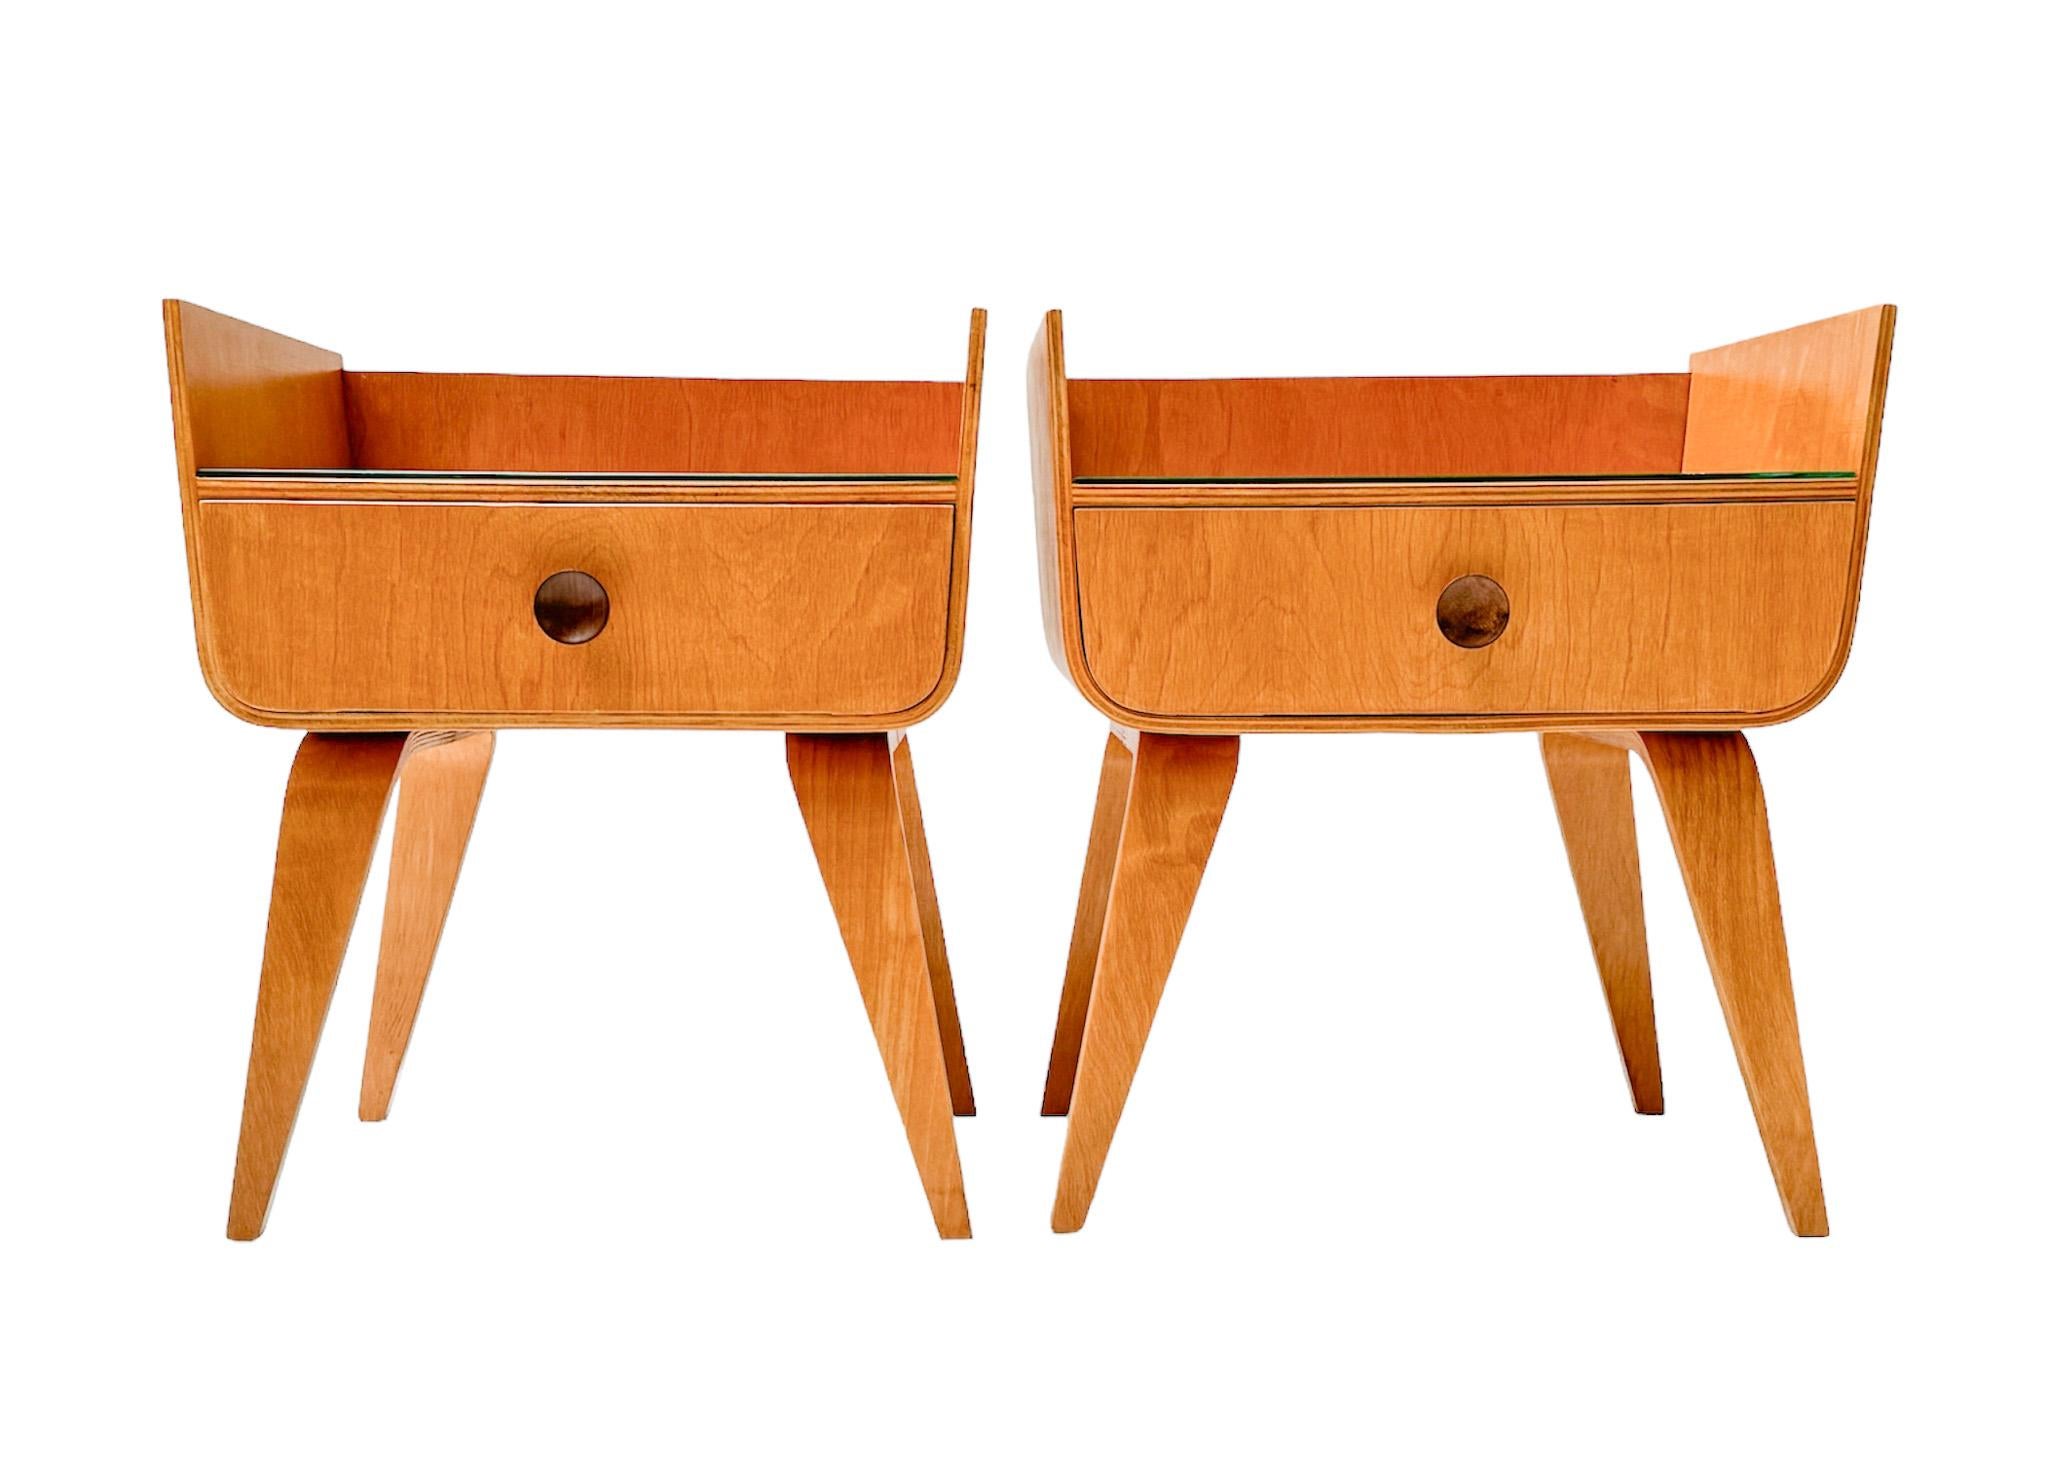  Birch Mid-Century Modern Nightstands or Bedside Tables by Cor Alons, 1949 1